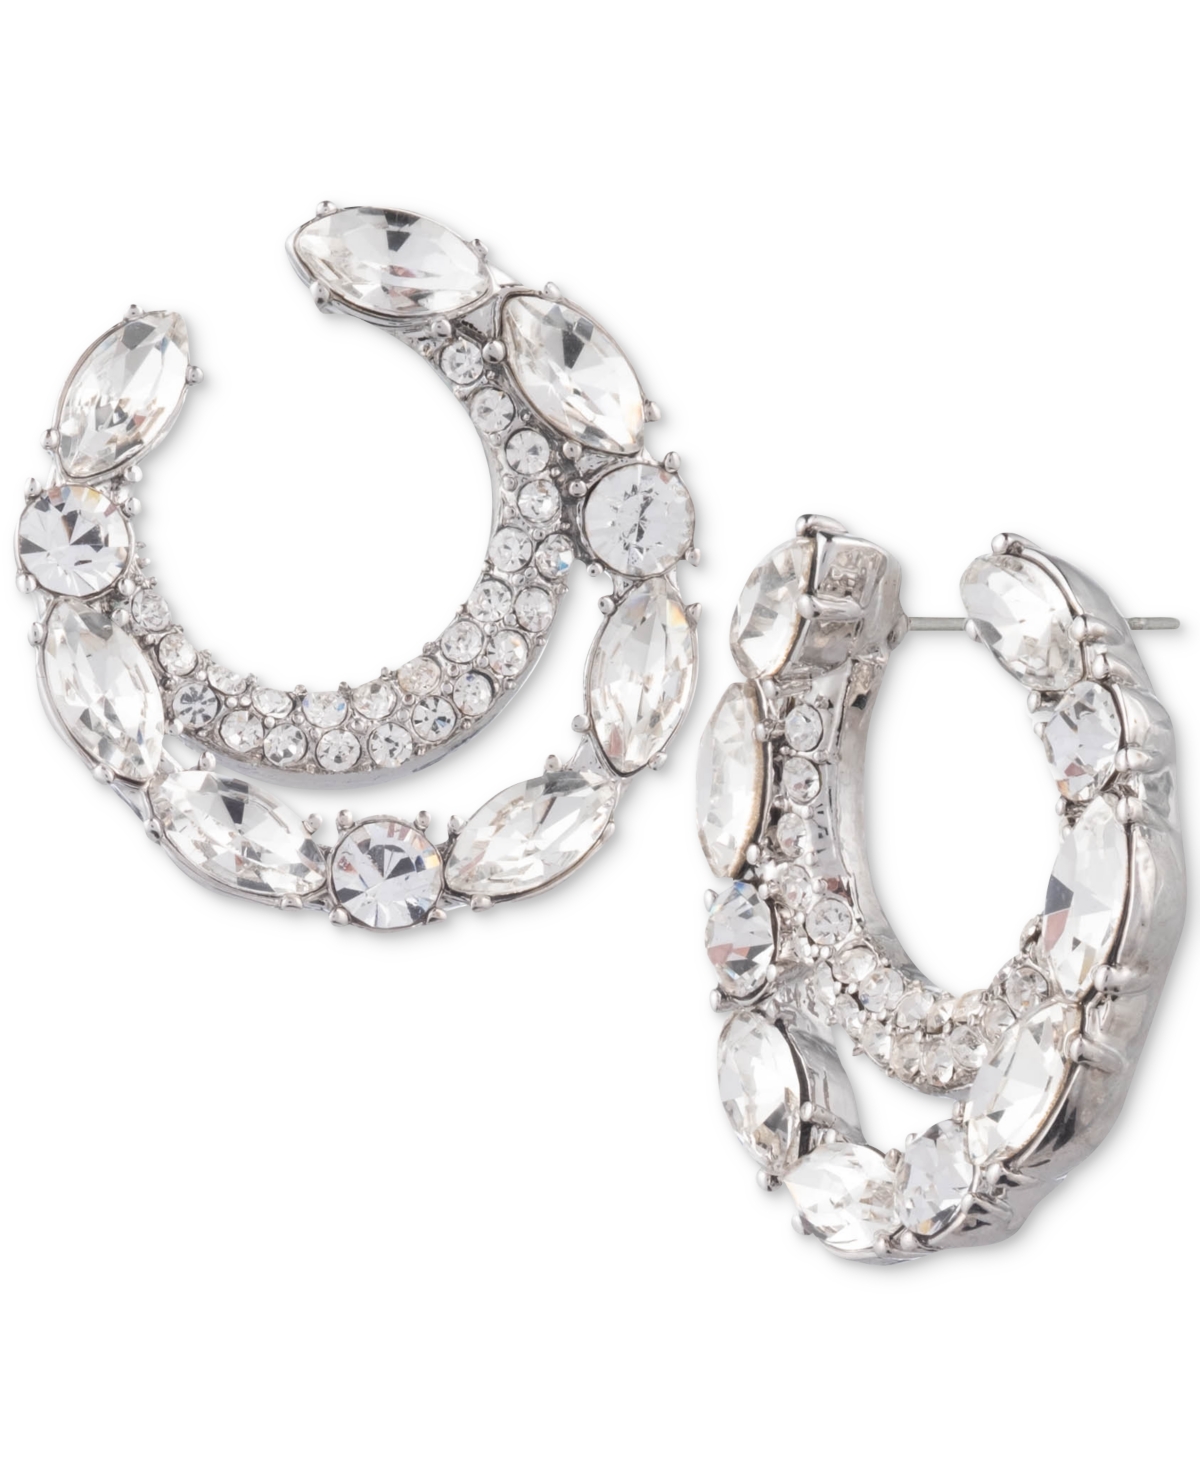 Givenchy Silver-tone Crystal Pave Stone Double Small Hoop Earrings, 0.82"